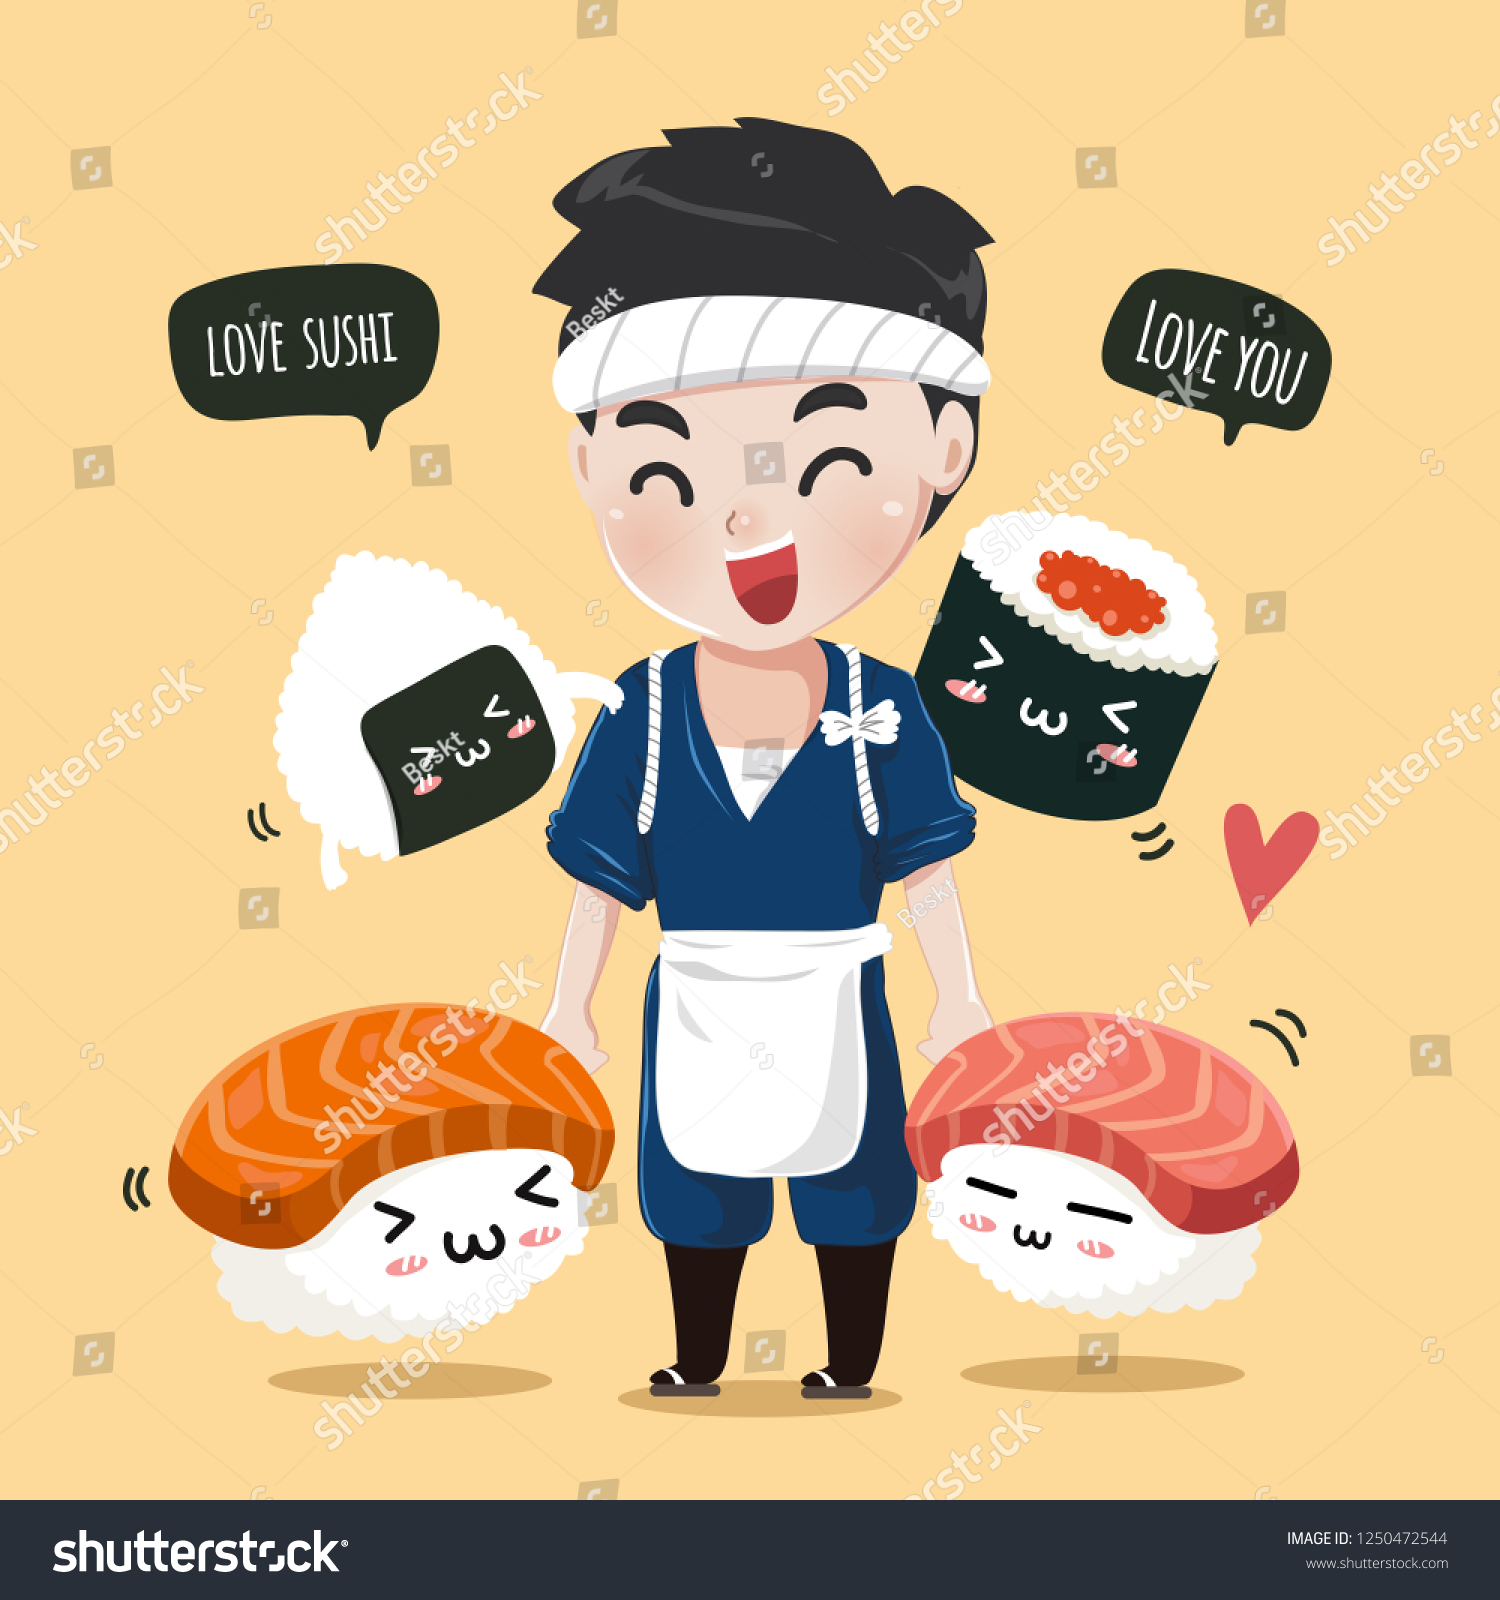 16x16 DesignsByJnk5 Cooking Cute Sushi Chef-Cooking Throw Pillow Multicolor